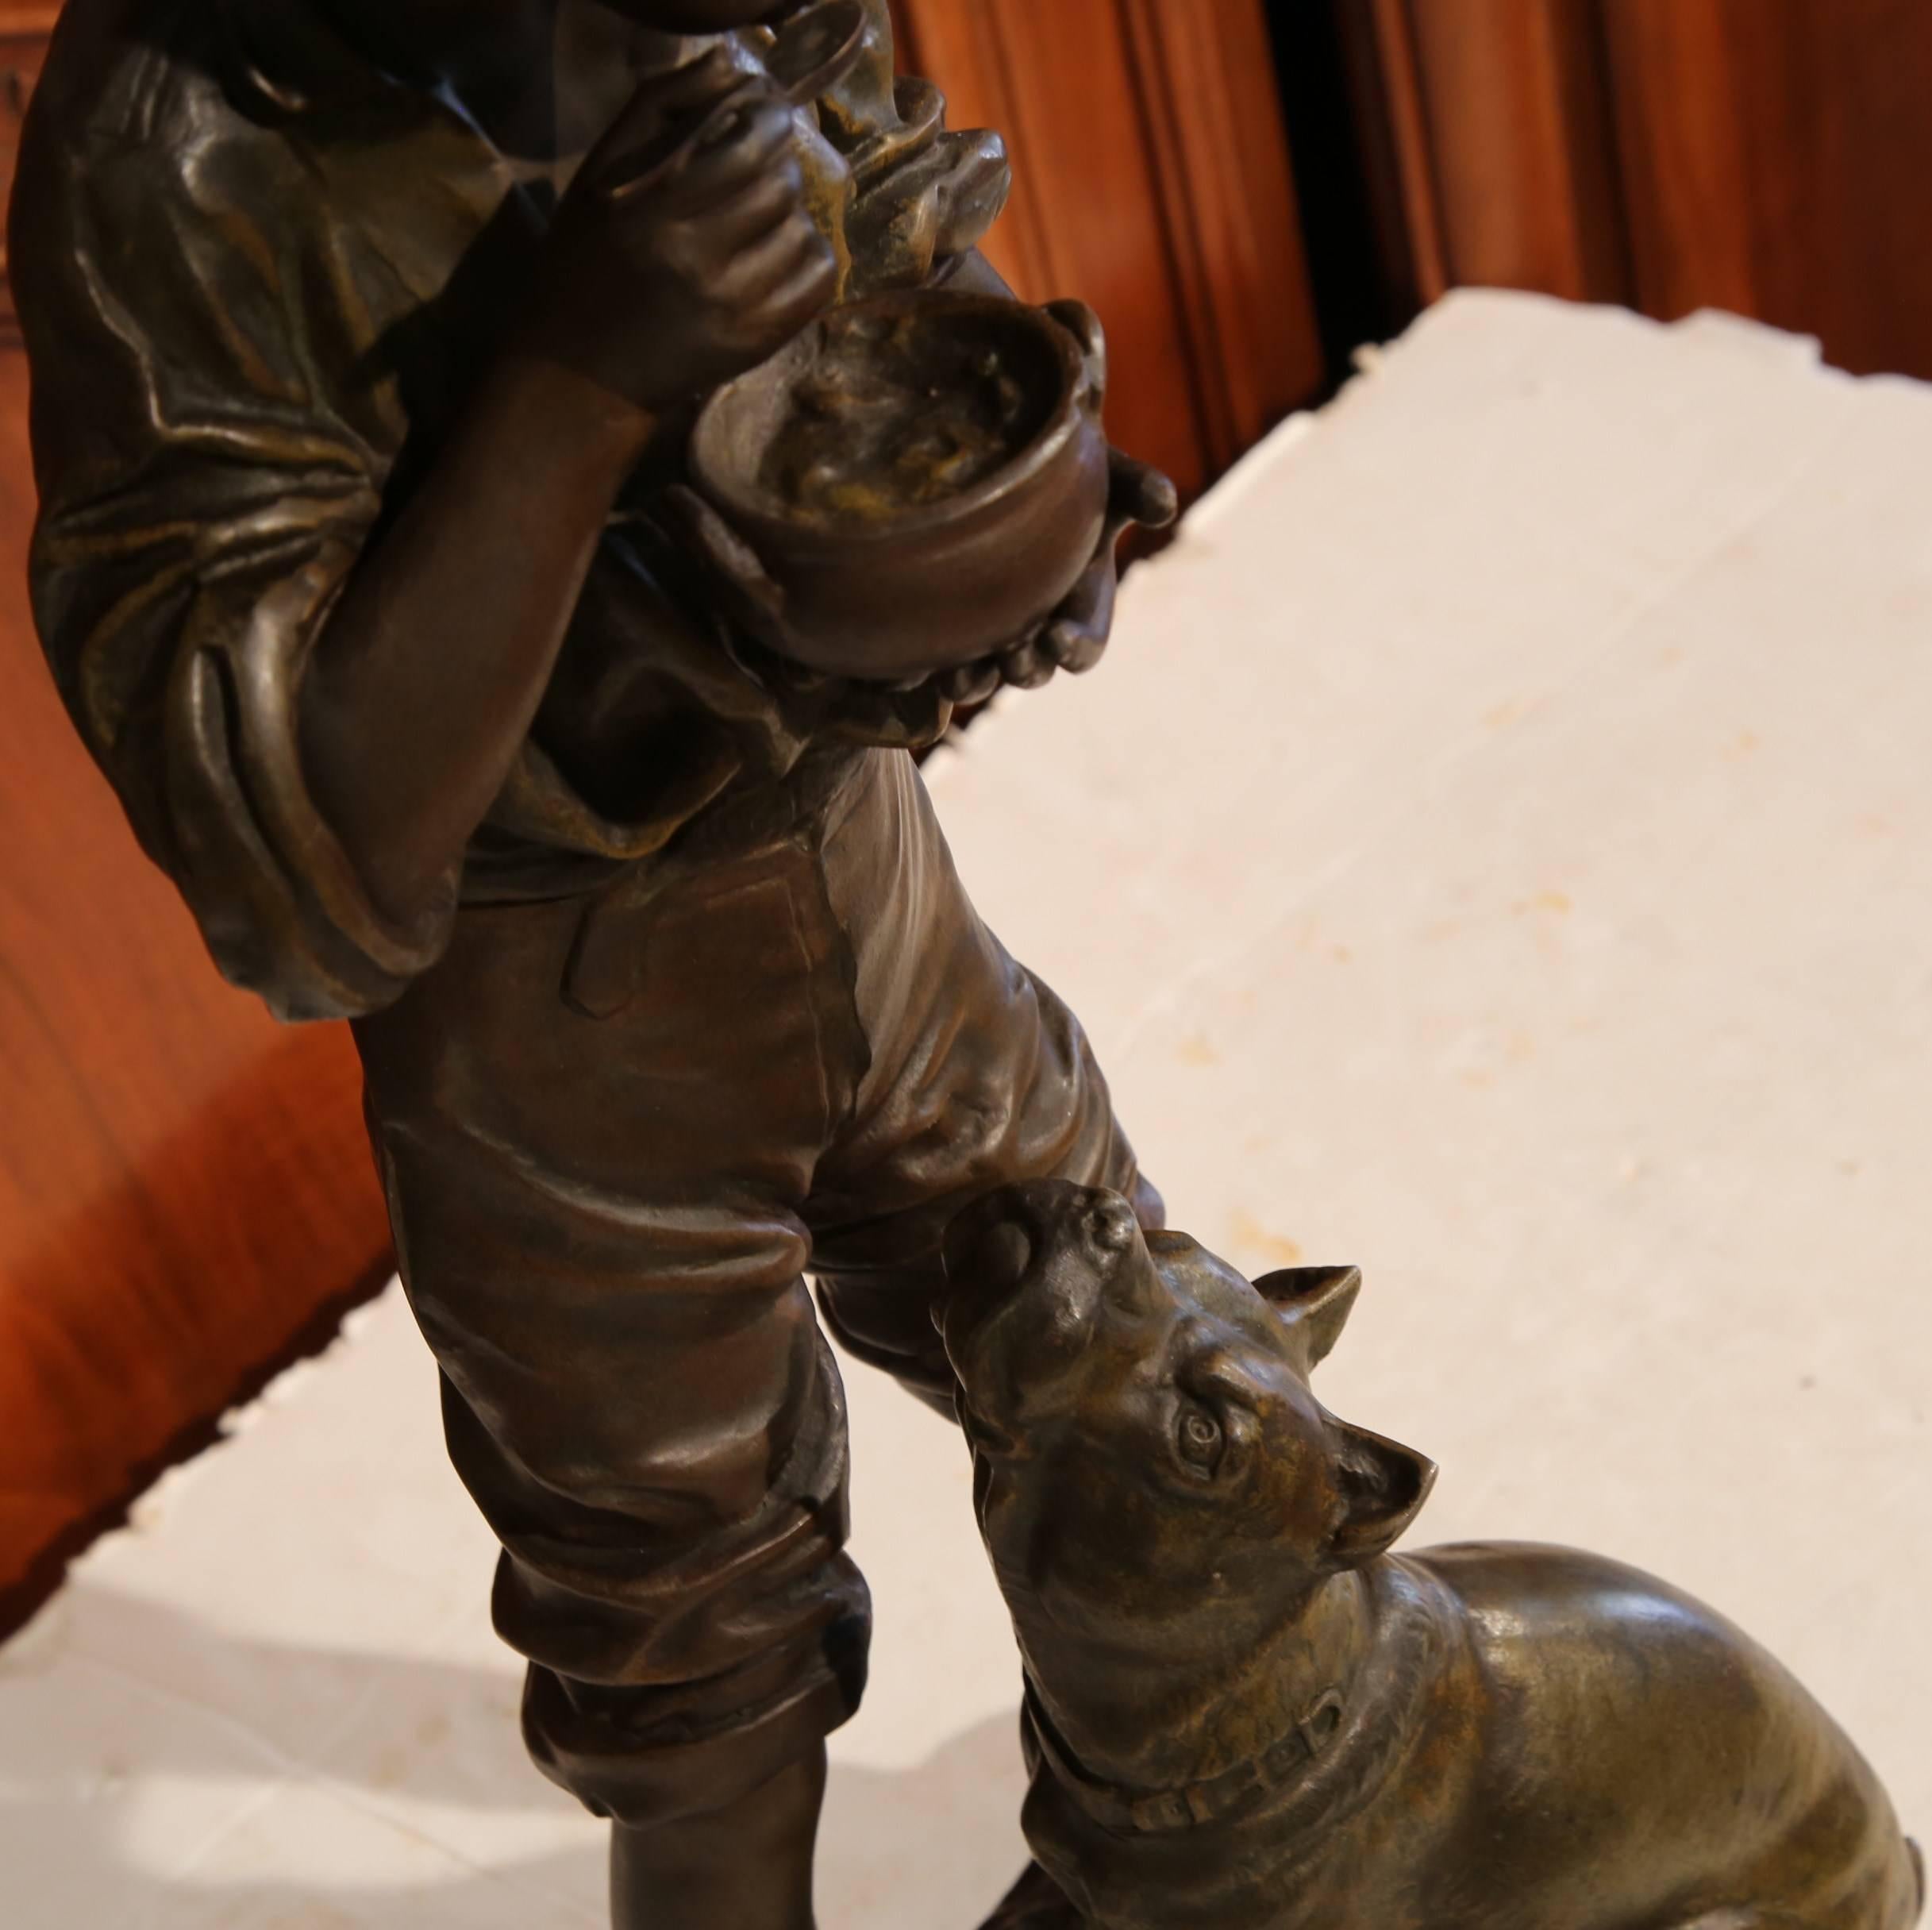 Belgian Early 20th Century Belgium Spelter Boy and Dog Sculpture Signed V. Rousseau 1932